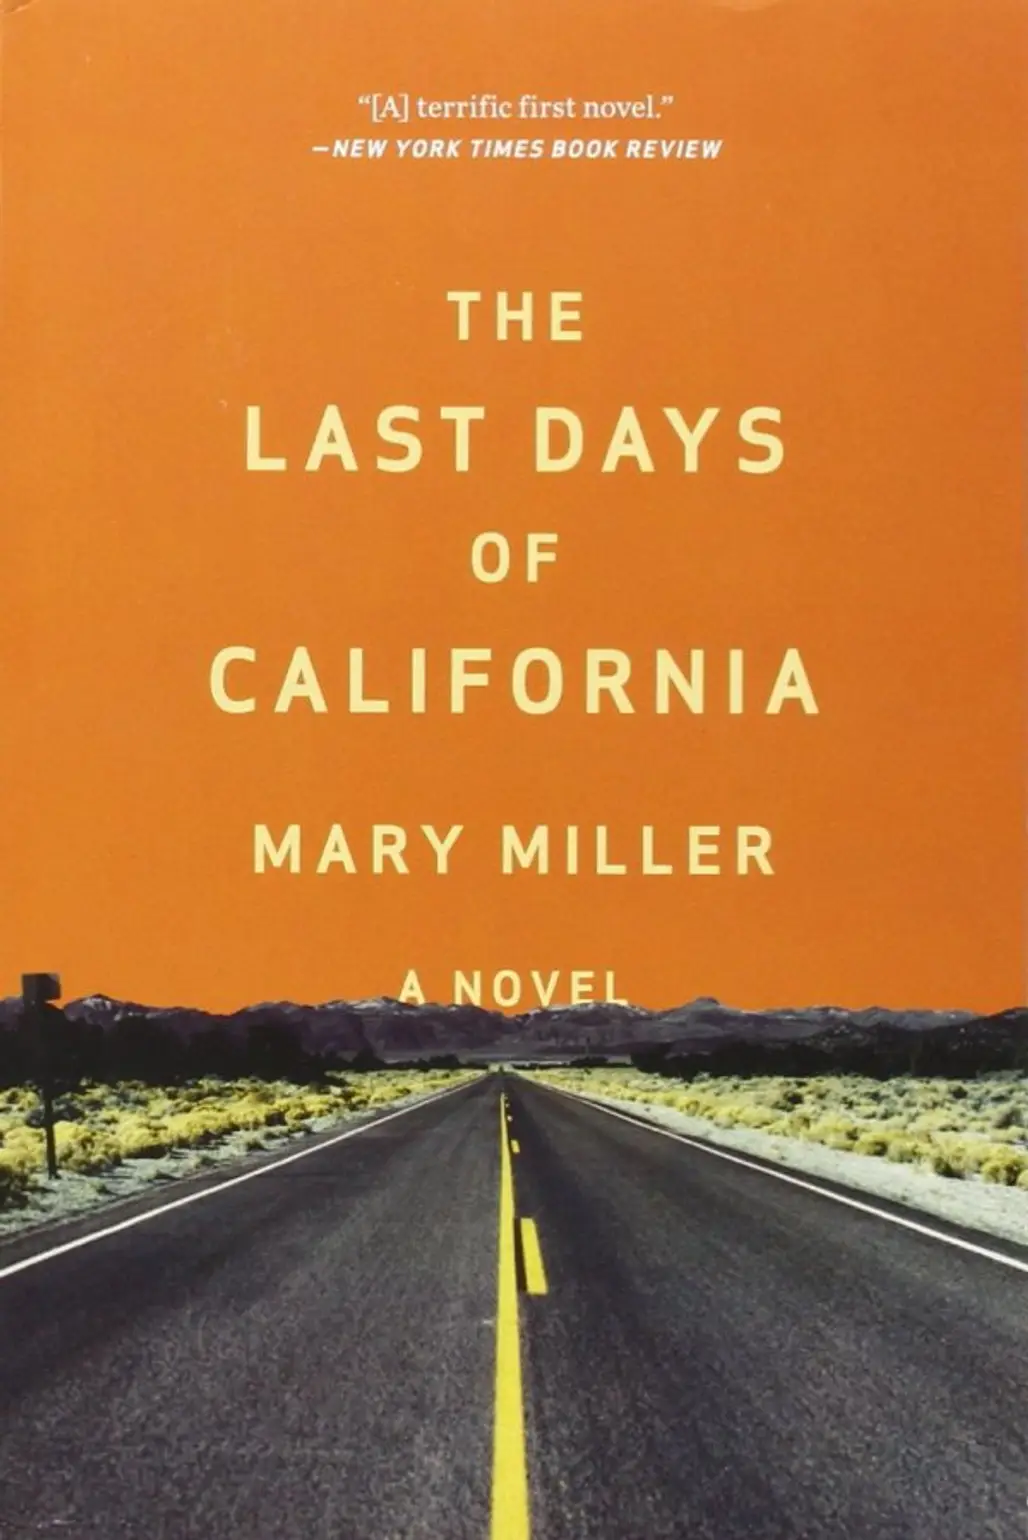 The Last Days of California by Mary Miller